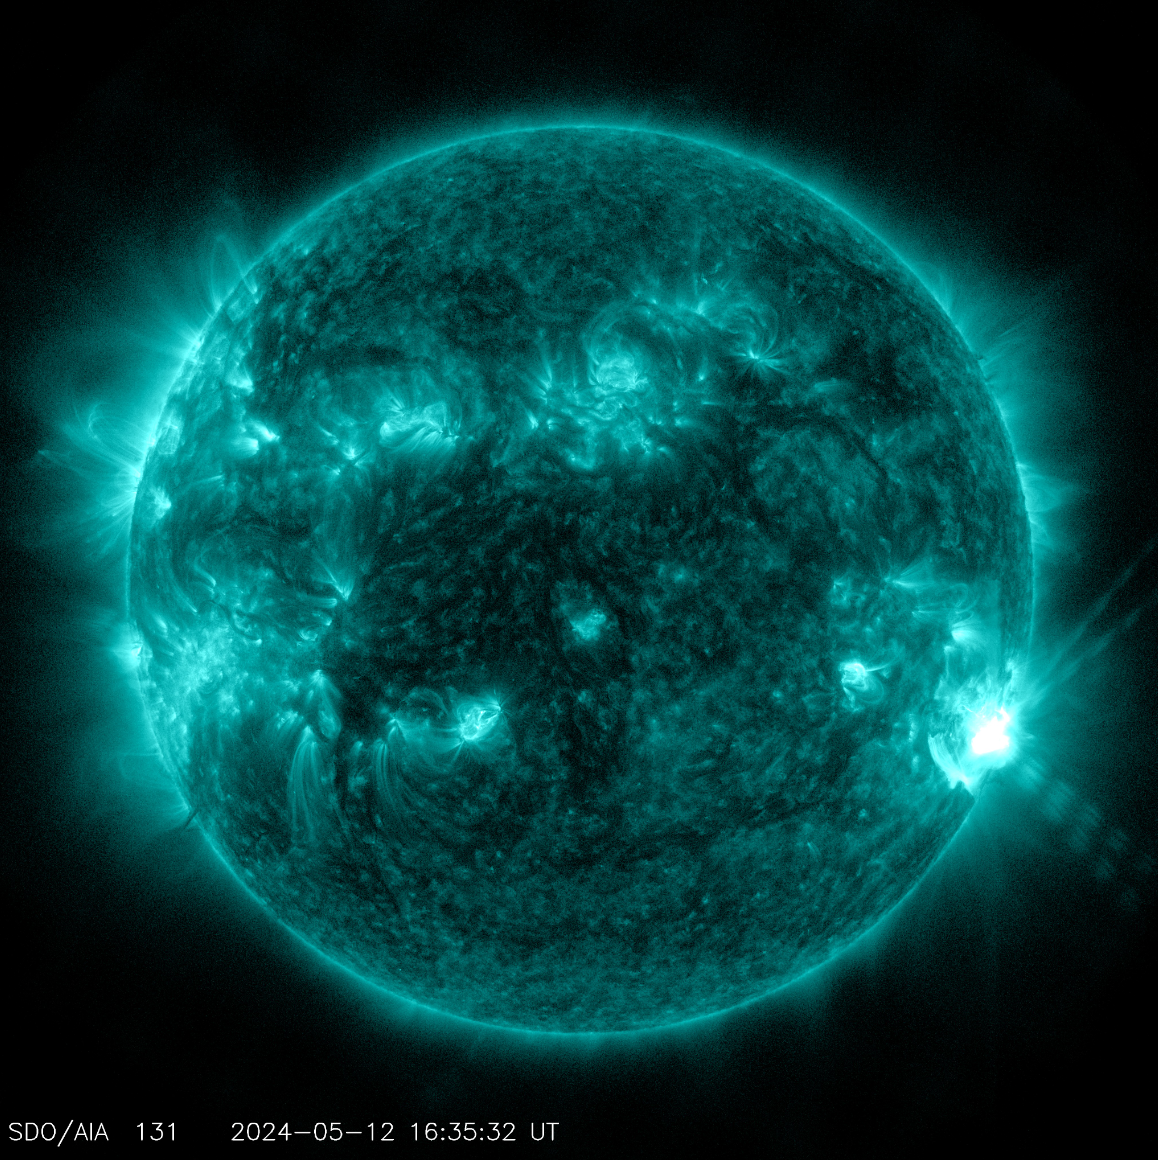 NASA’s Solar Dynamics Observatory captured this image of a solar flare – as seen in the bright flash in the lower right – on May 12. The image shows a subset of extreme ultraviolet light that highlights the extremely hot material in flares and which is colorized in teal.